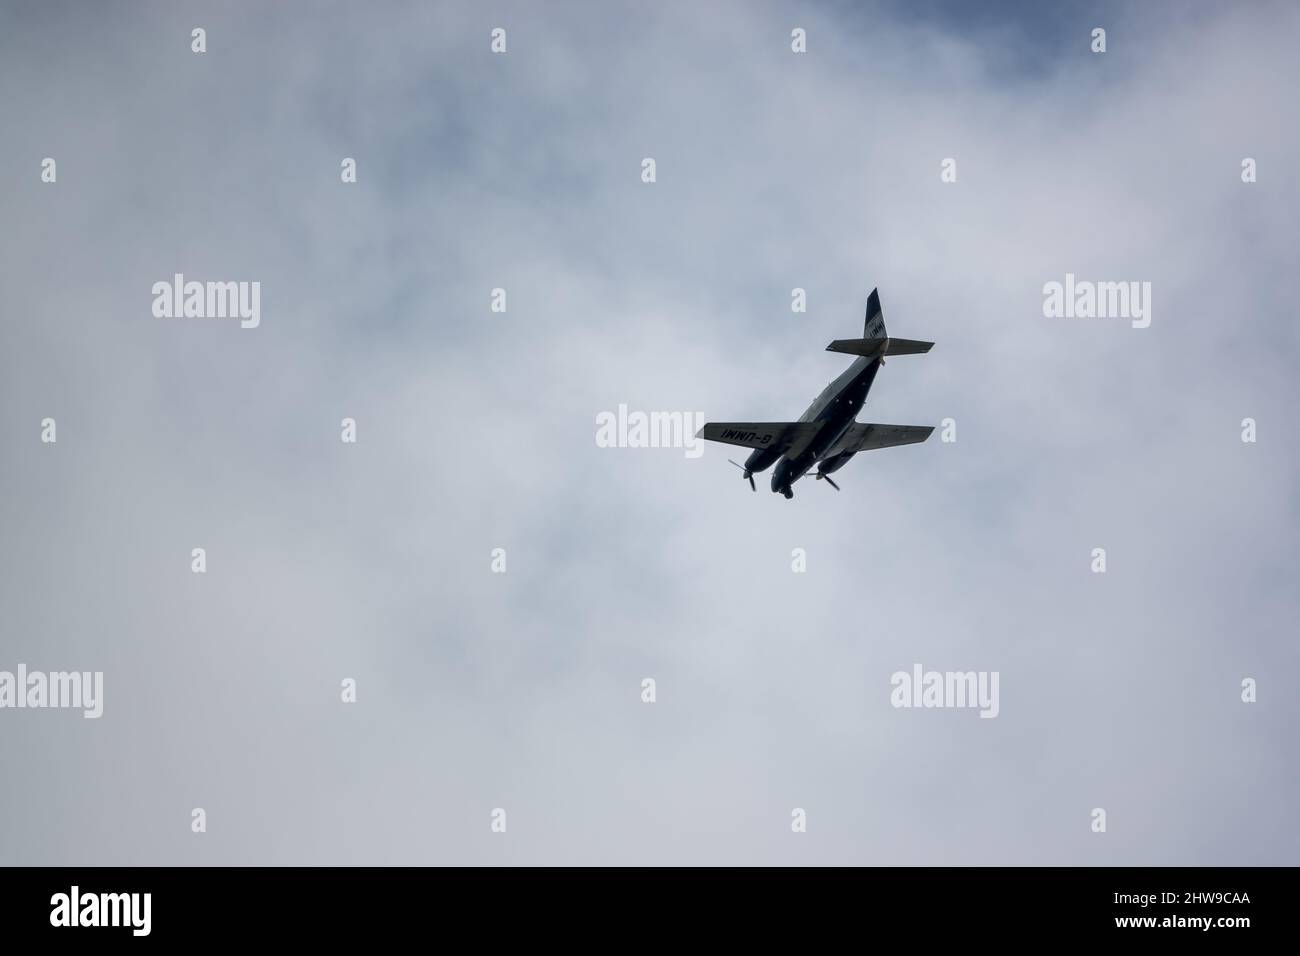 Piper PA-31-310 Navajo C, G-UMMI twin engined cabin class aircraft with surveillance equipment flying over Salisbury Plain military training area UK Stock Photo